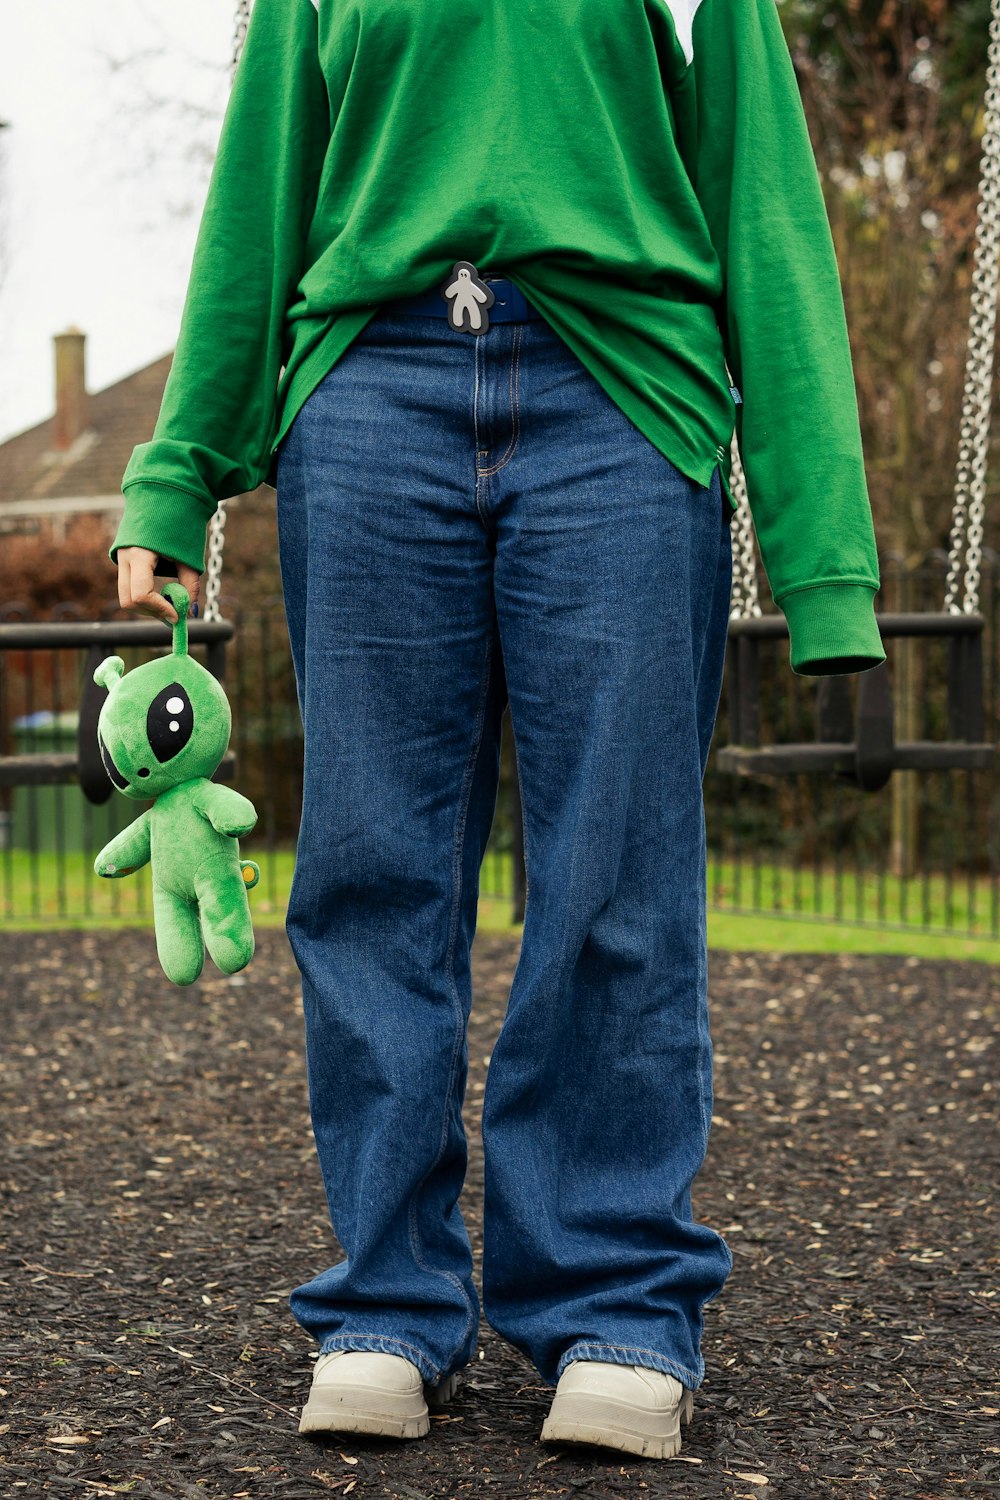 a person in a green shirt holding a green stuffed animal